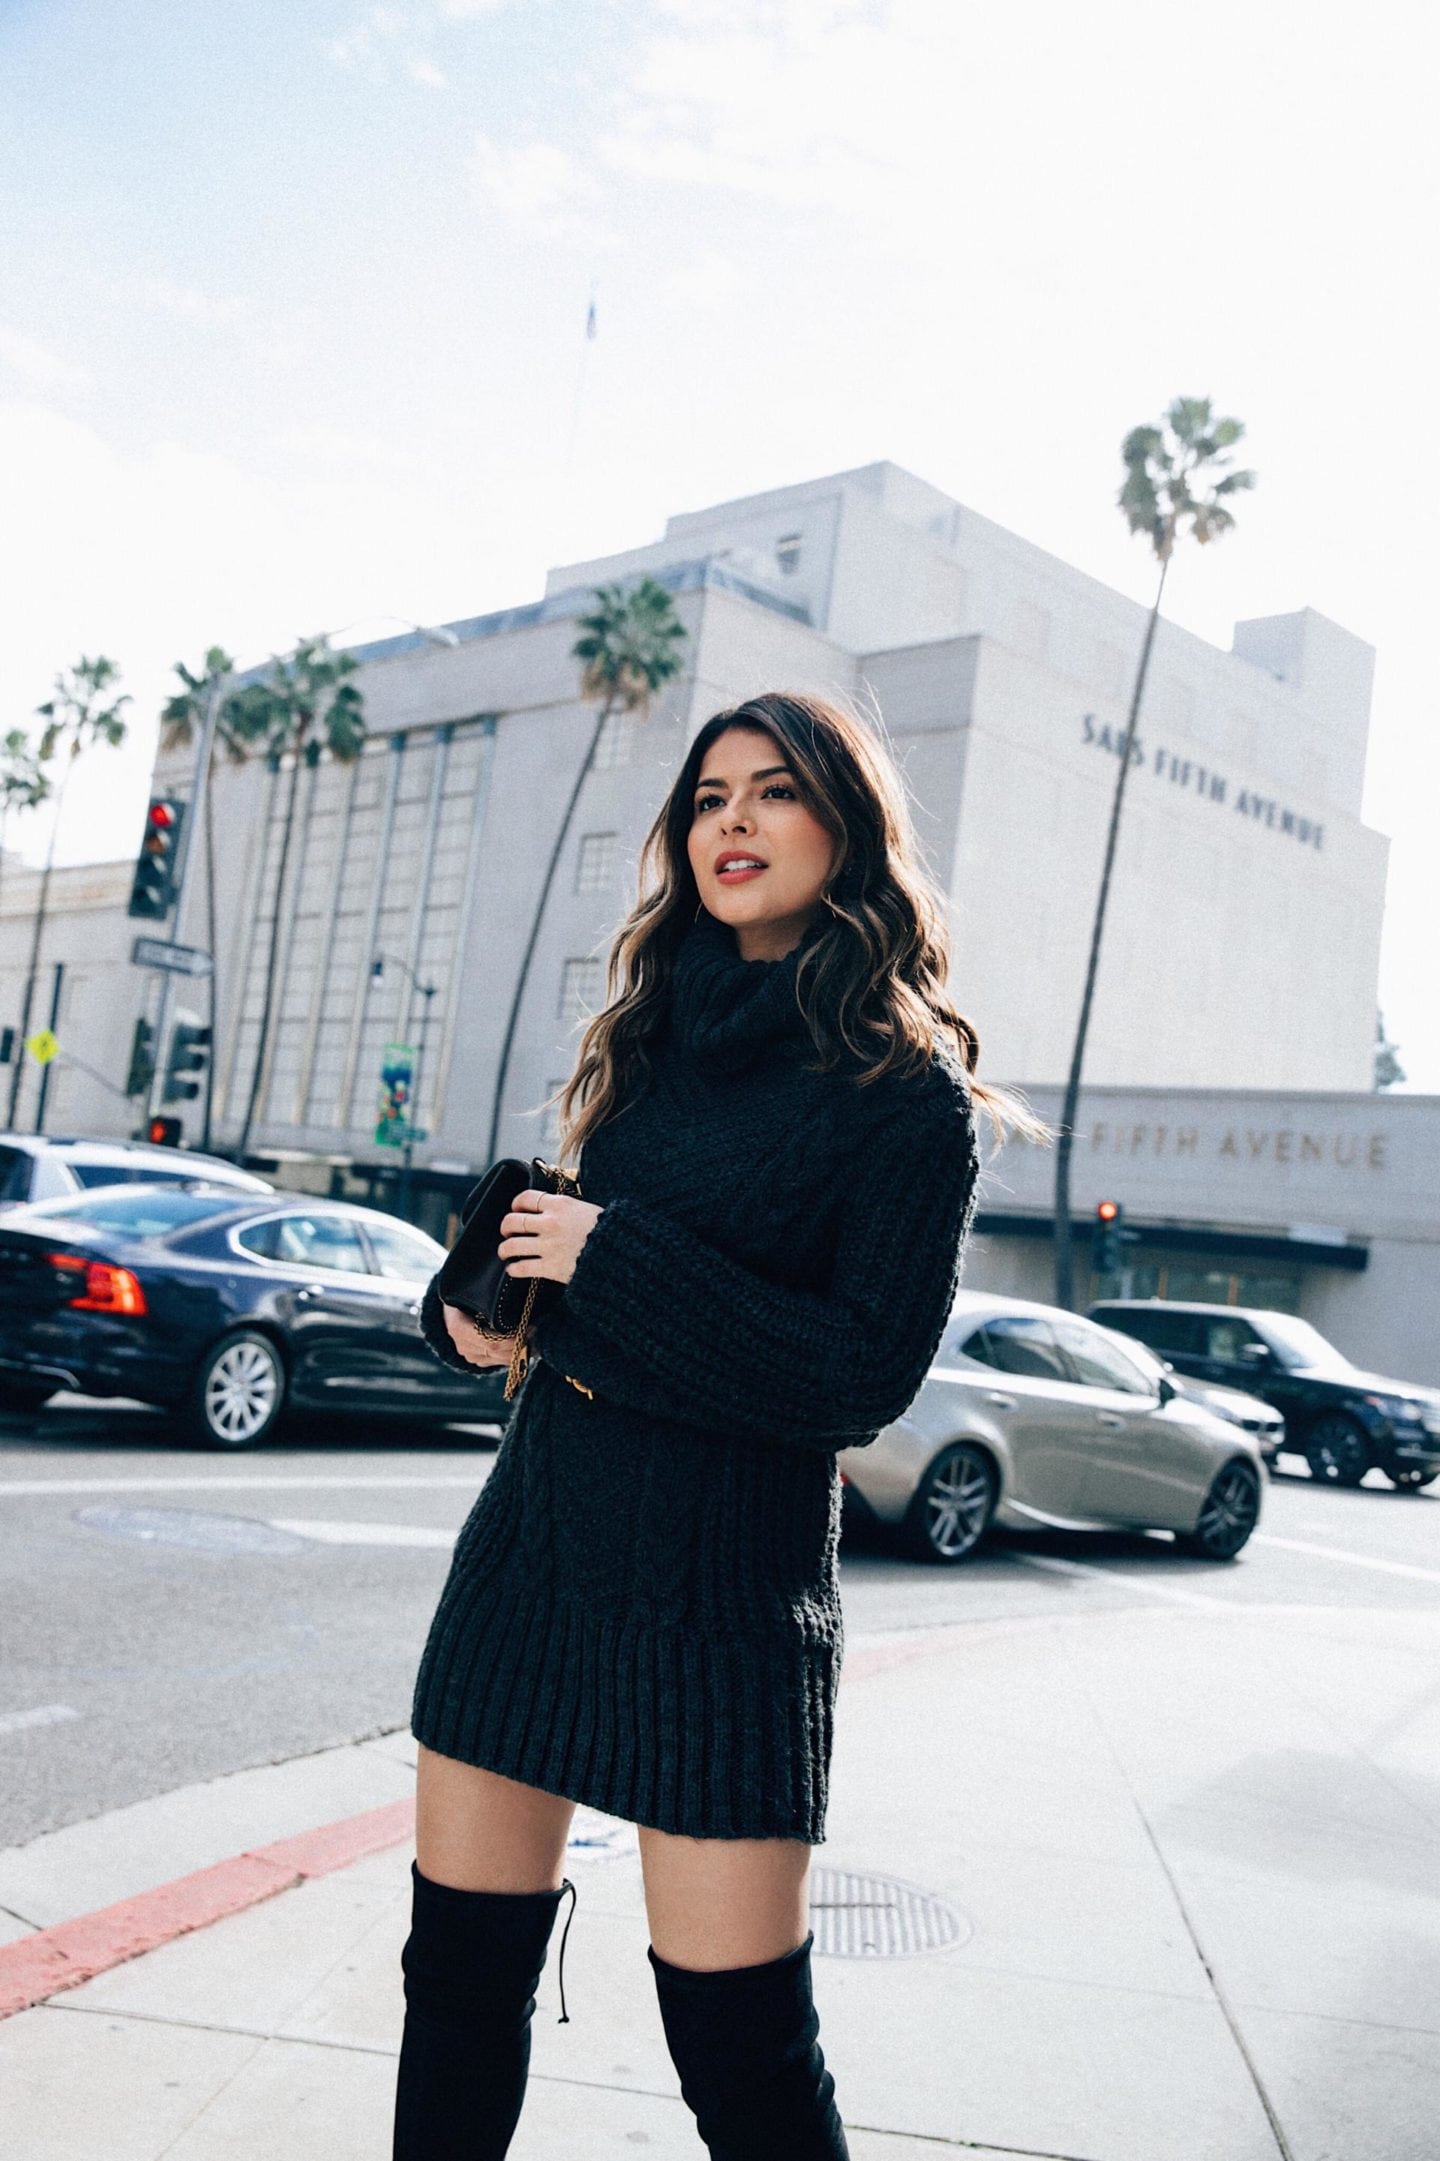 TheGirlFromPanama.com | How to Look Chic in the Winter | Black Sweater Dress with Valentino Bag in Los Angeles, CA